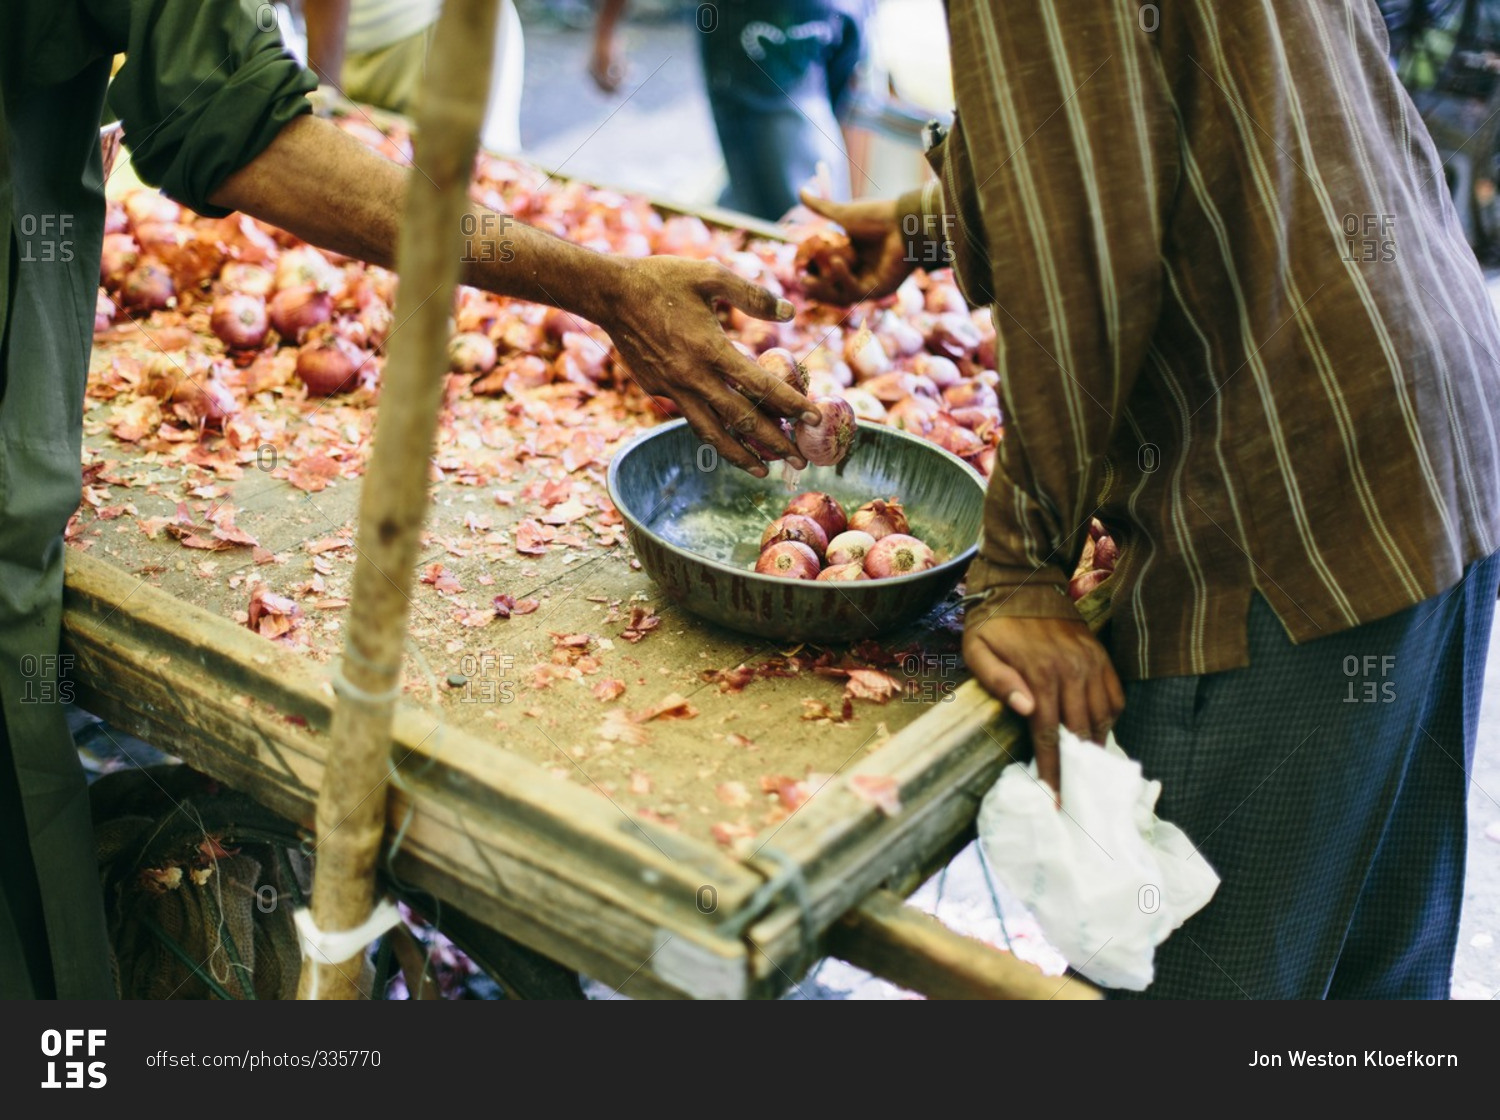 Man dropping onions into a bowl at a market in India